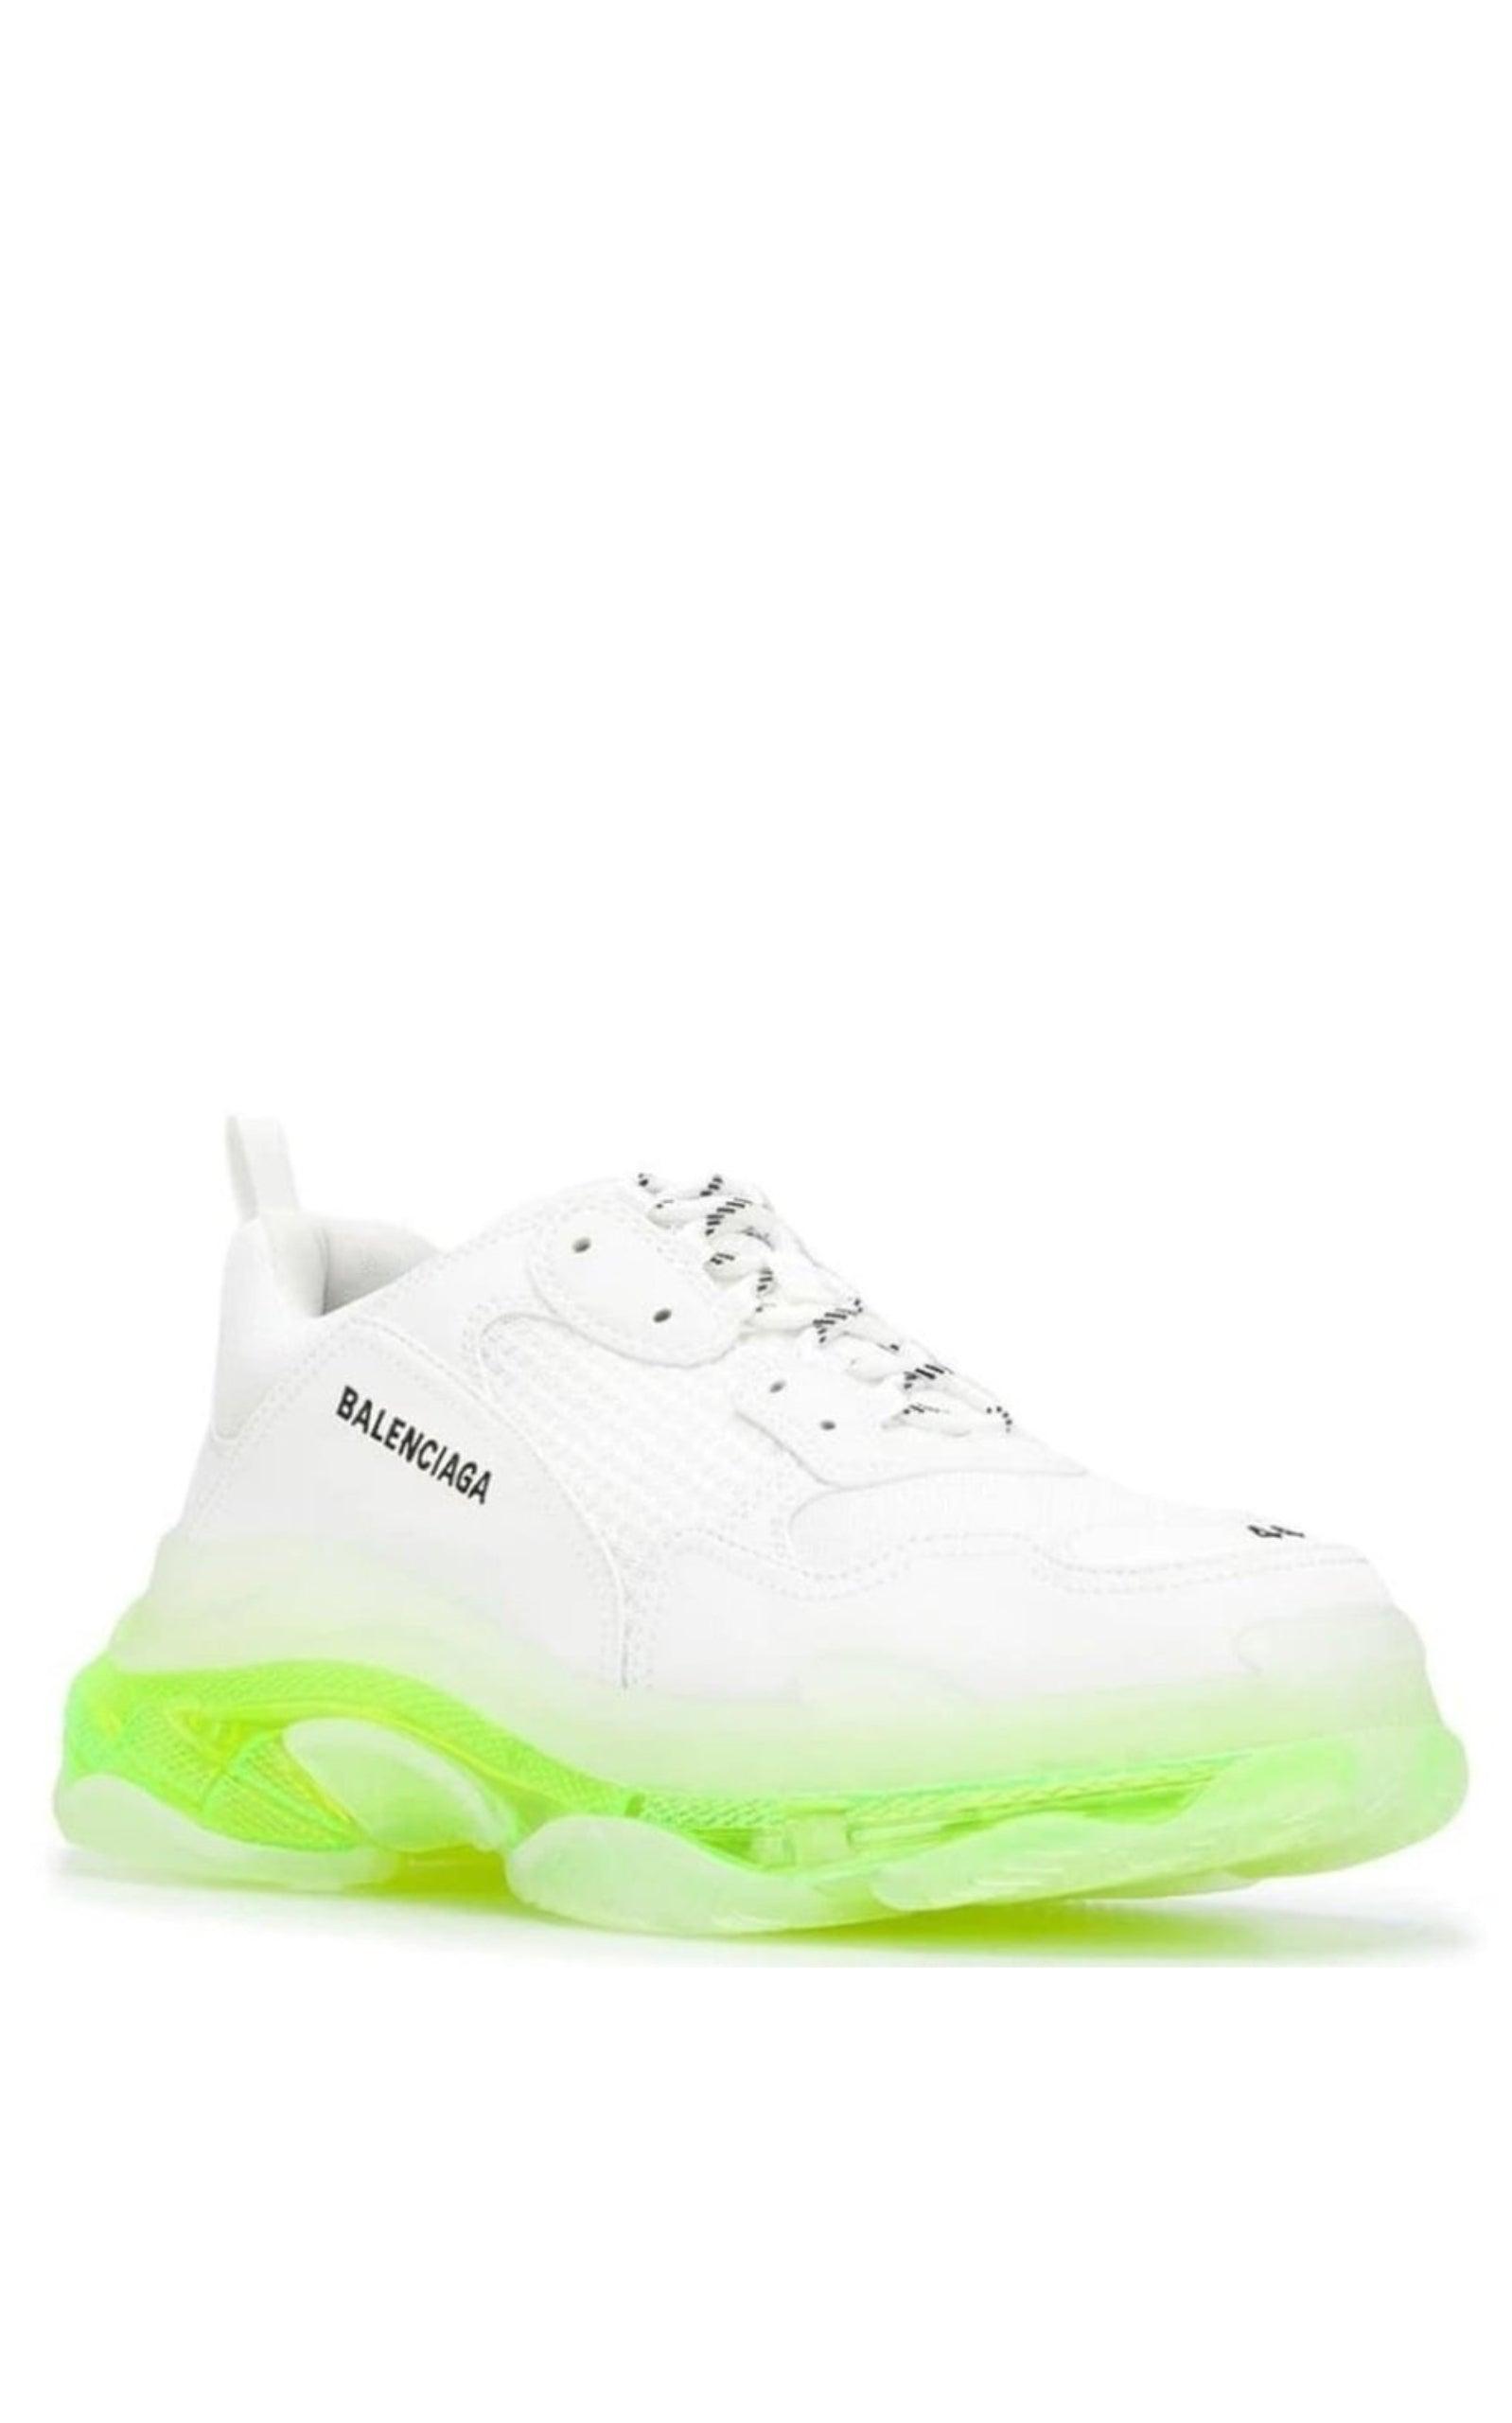 Balenciaga Triple S Leather and Mesh Sneakers | Catalog